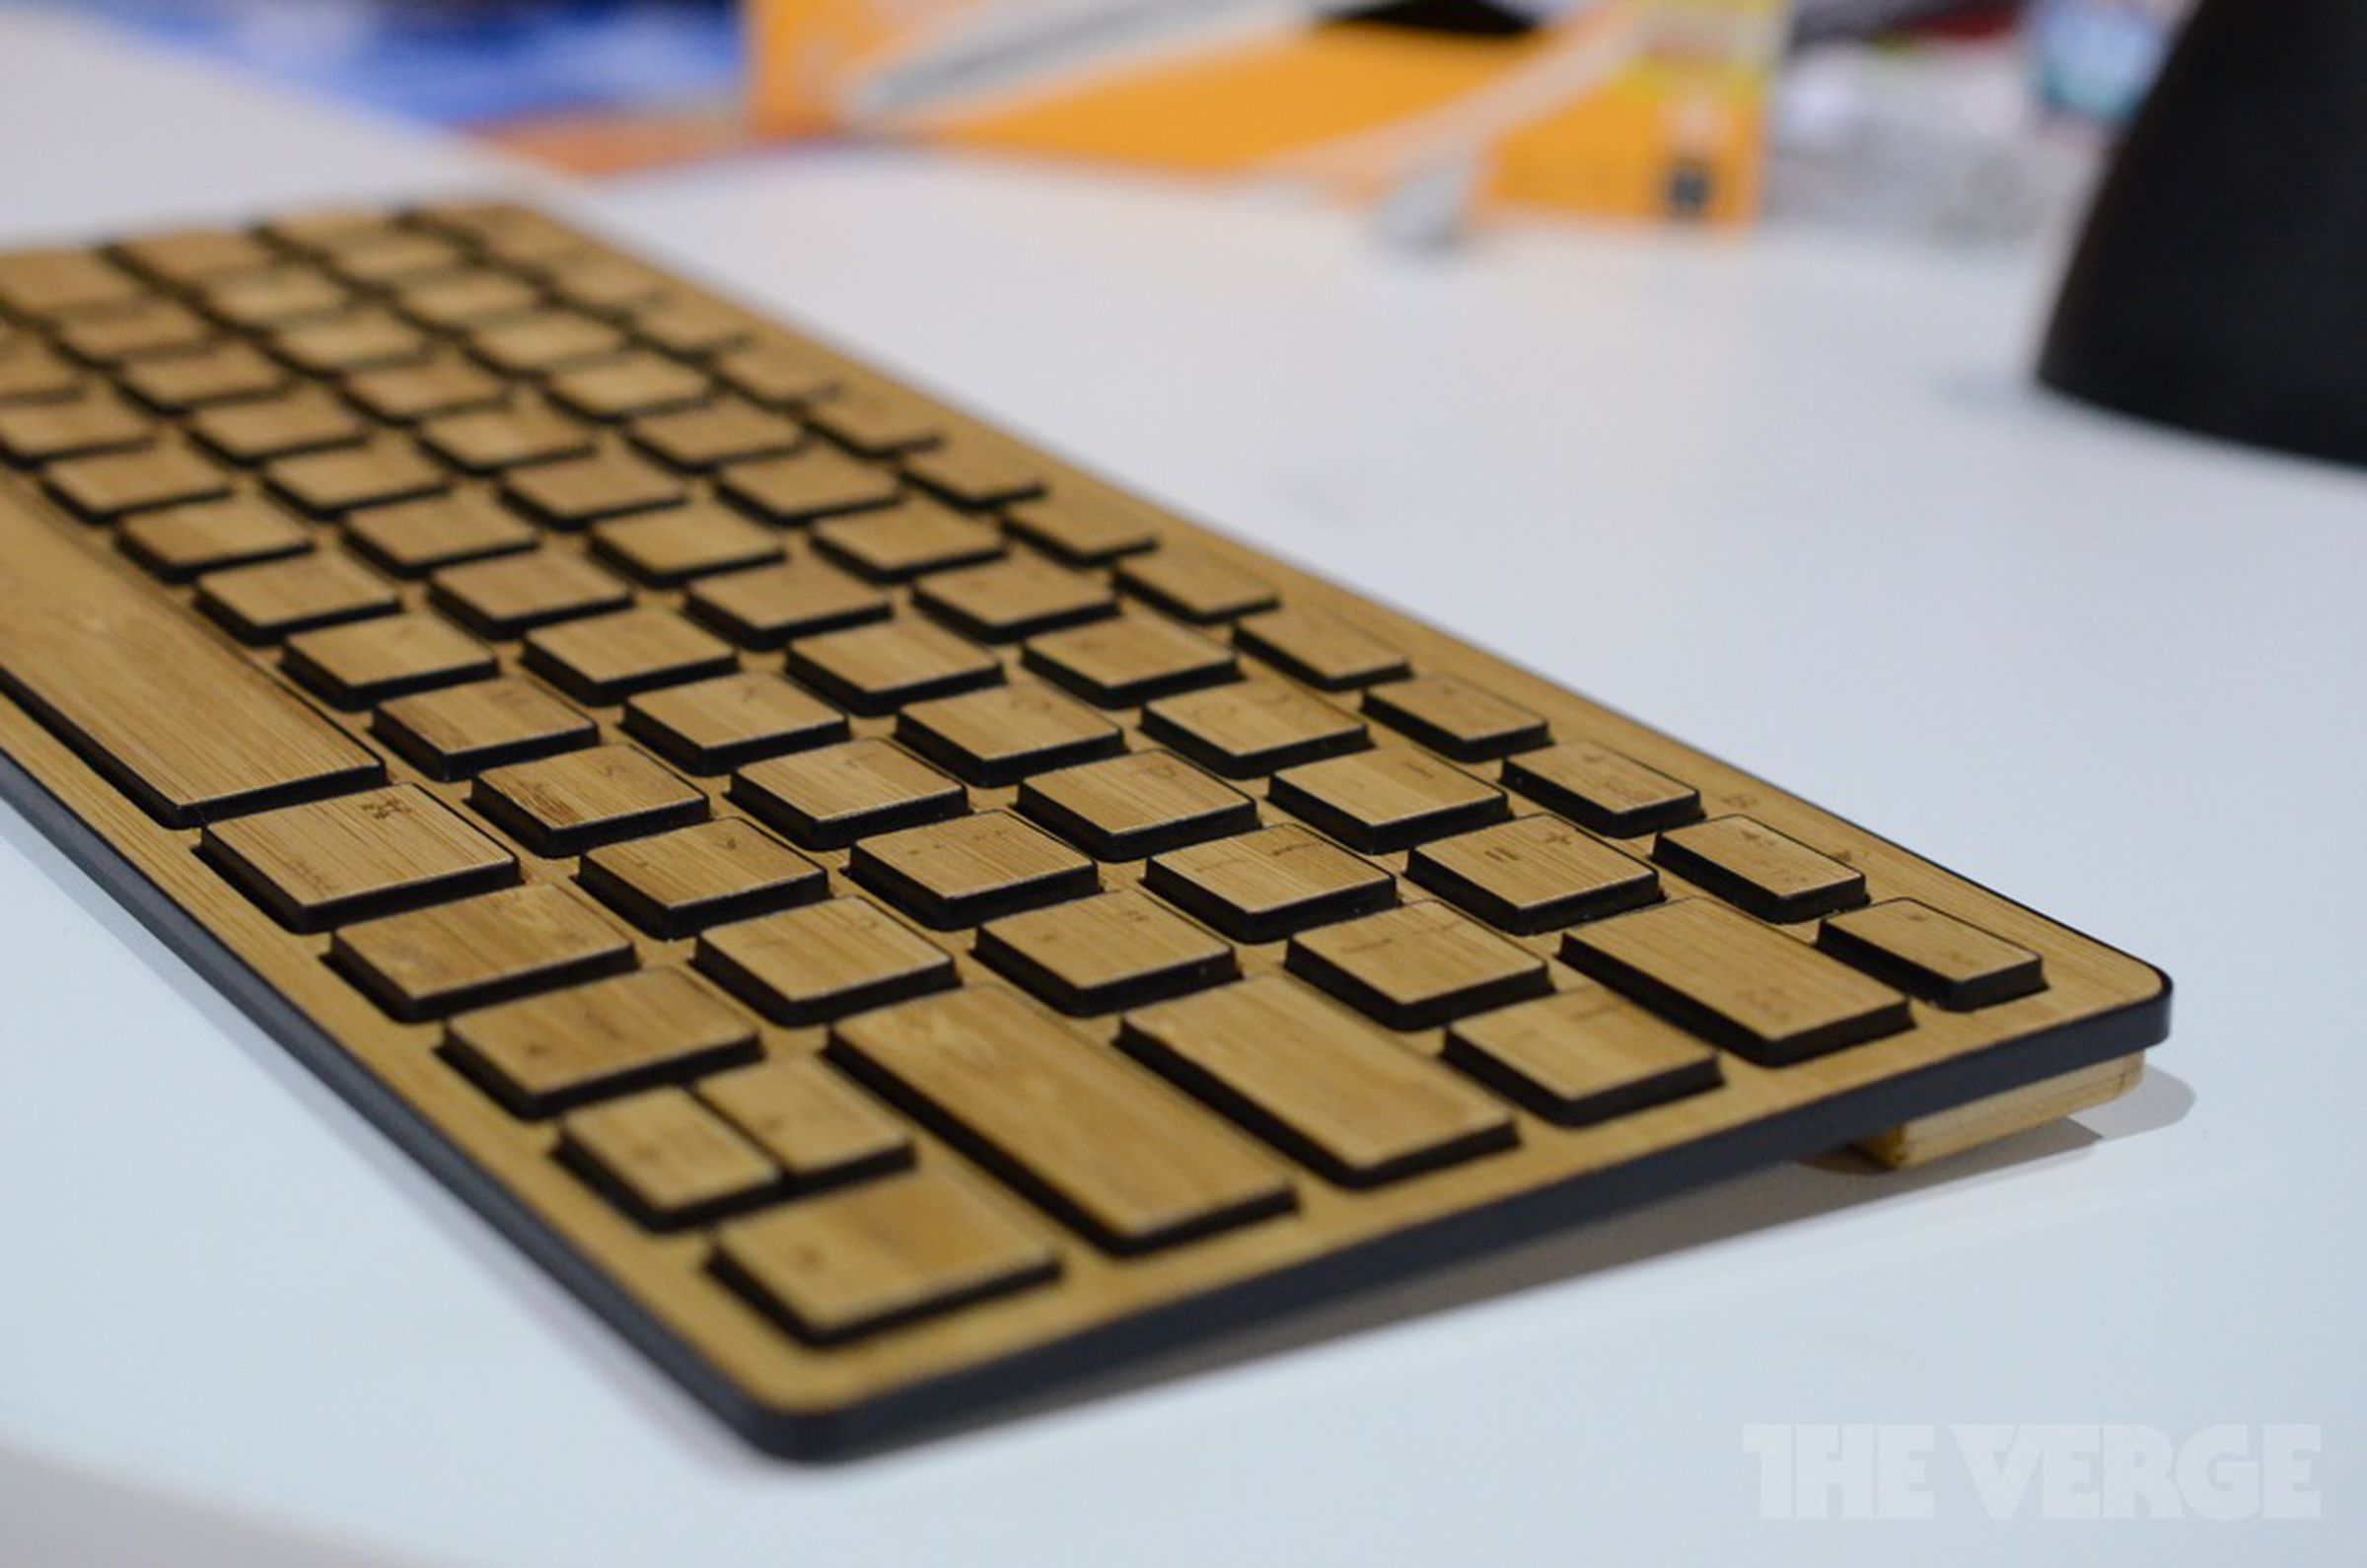 Impecca's Bamboo keyboards and mice hands-on photos